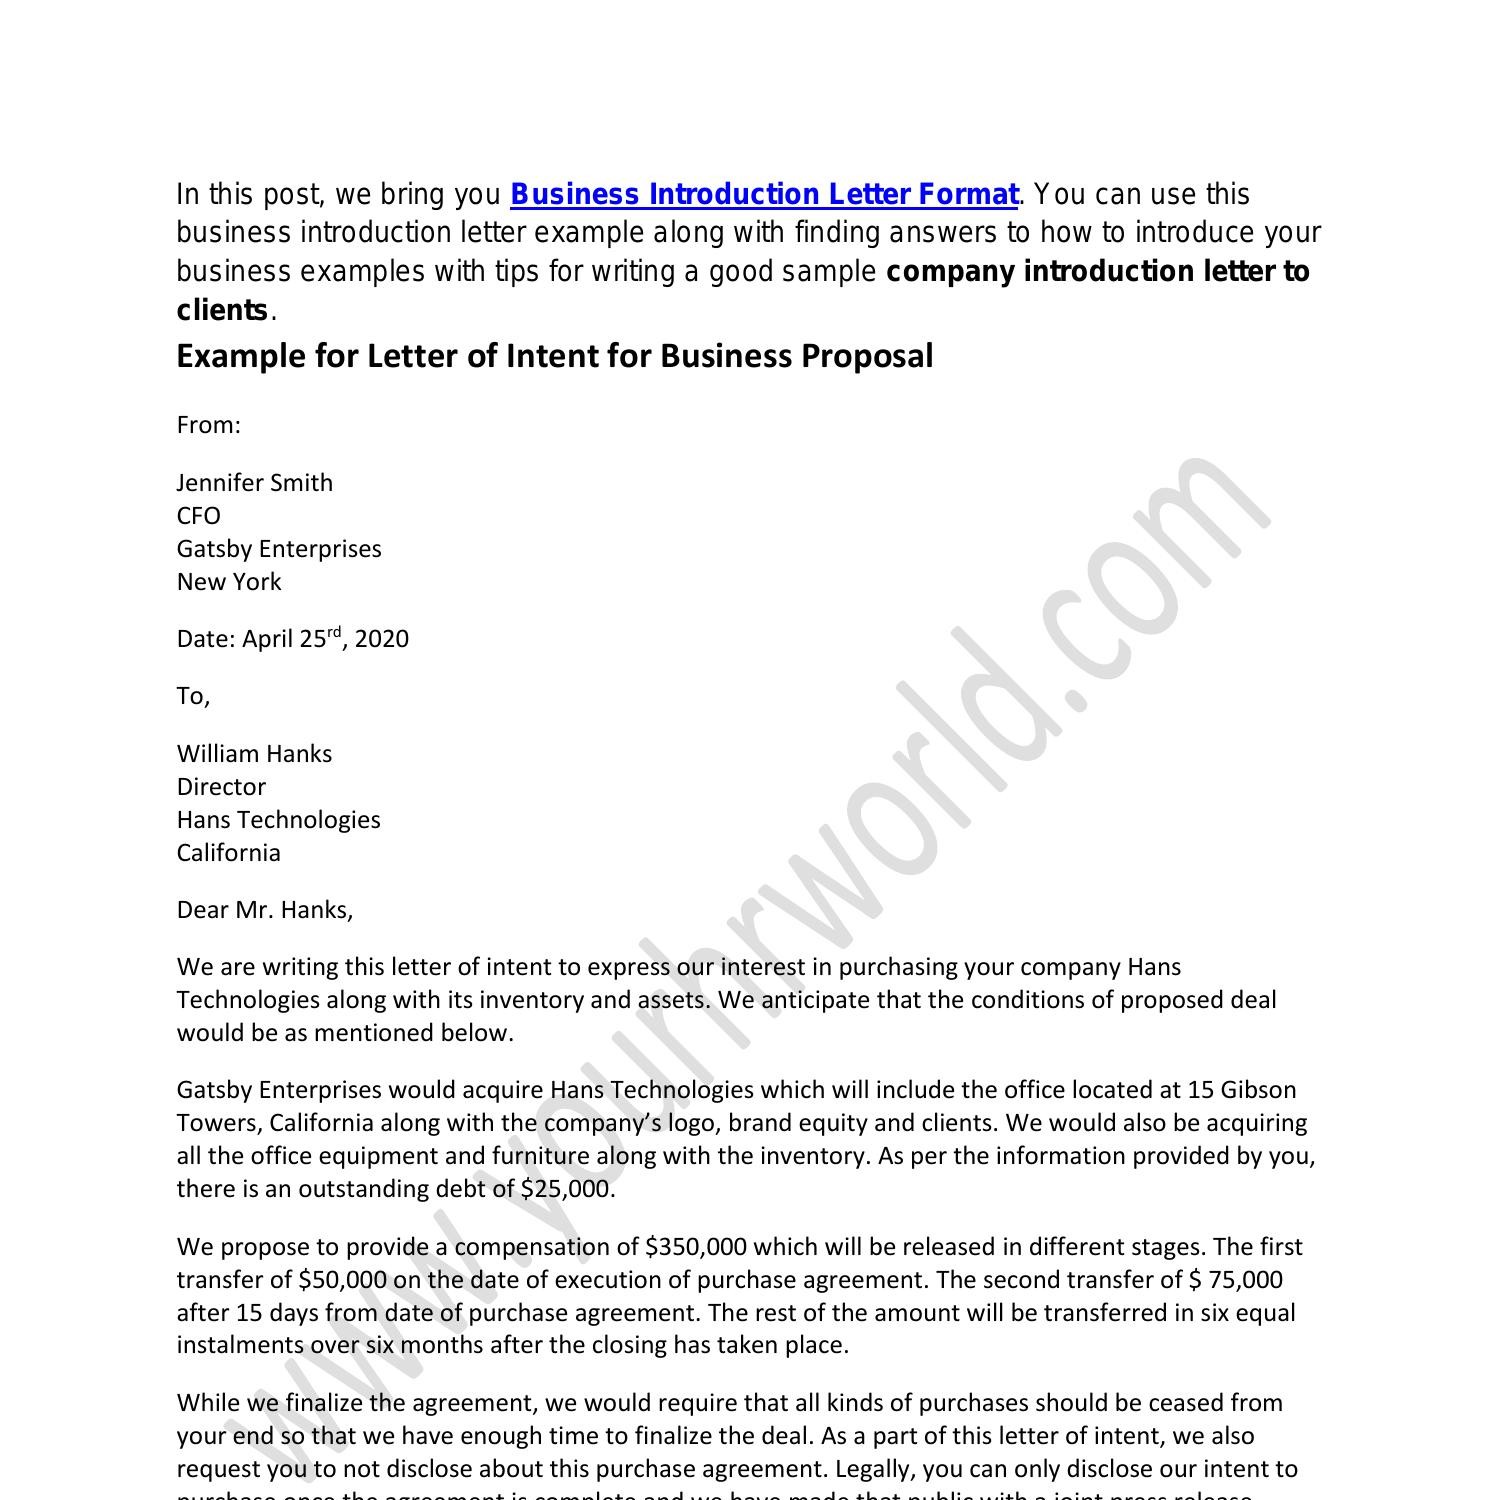 letter of intent for business transaction